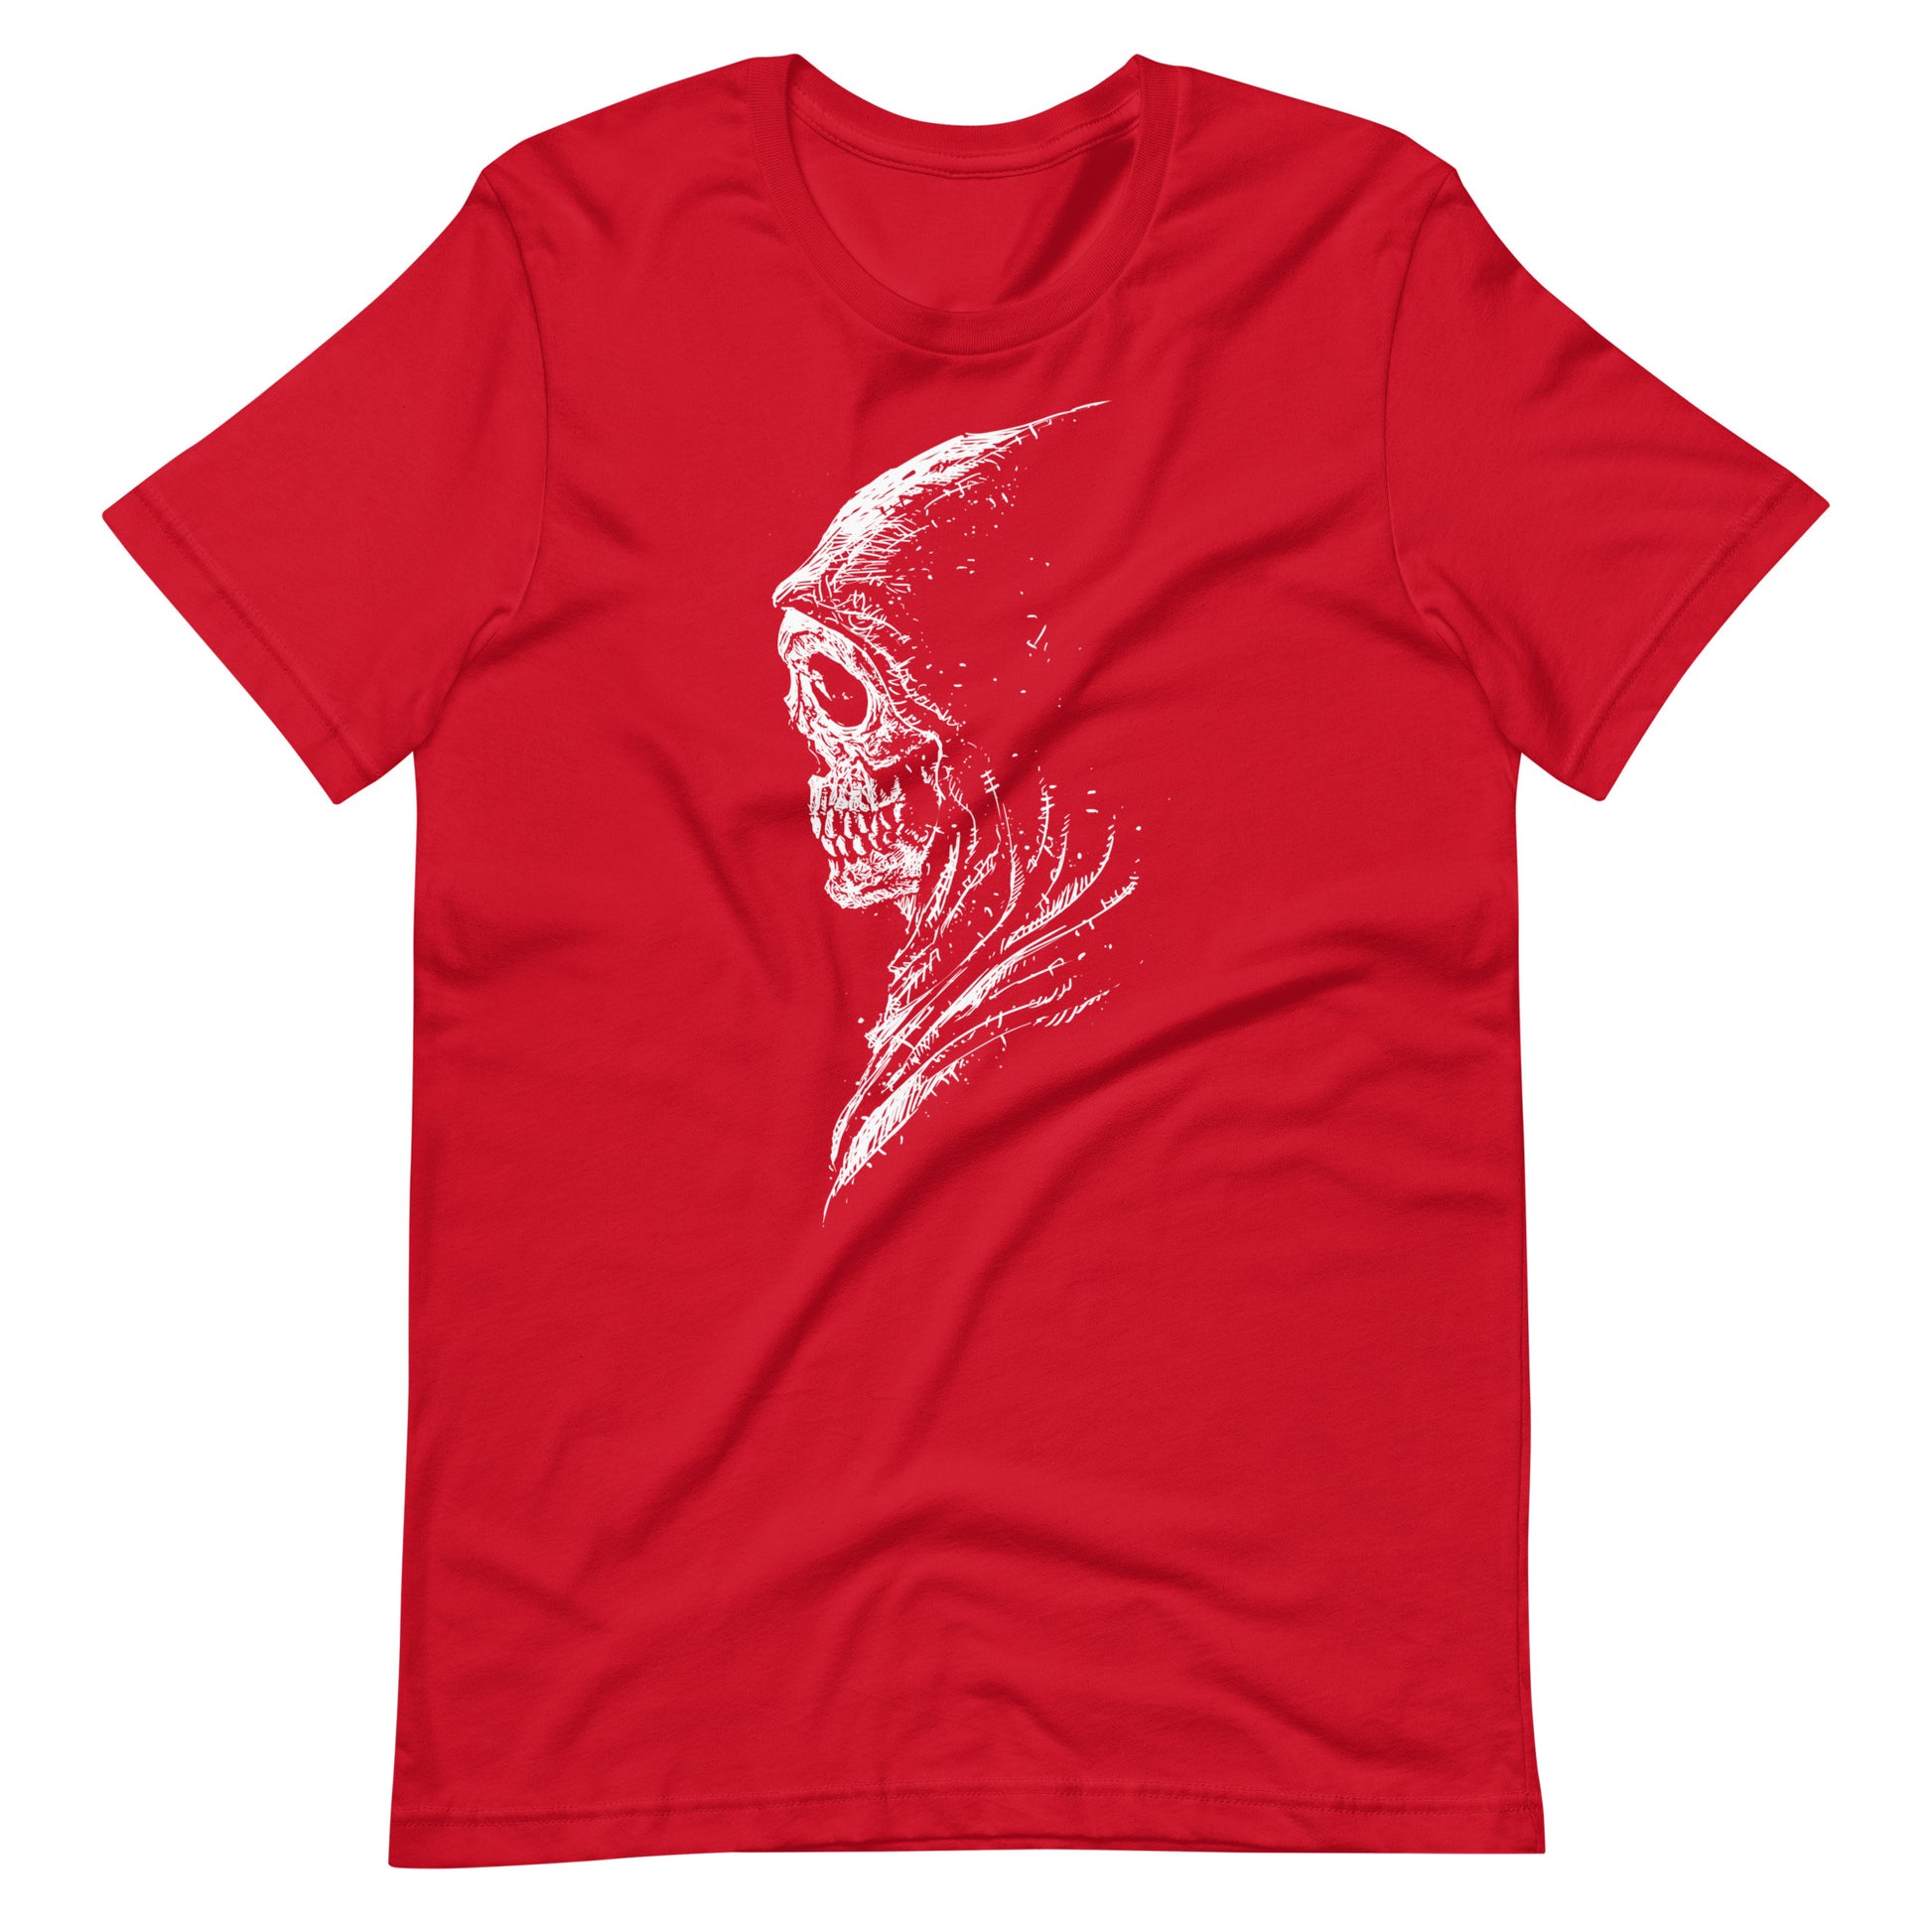 Muse - Men's t-shirt - Red Front